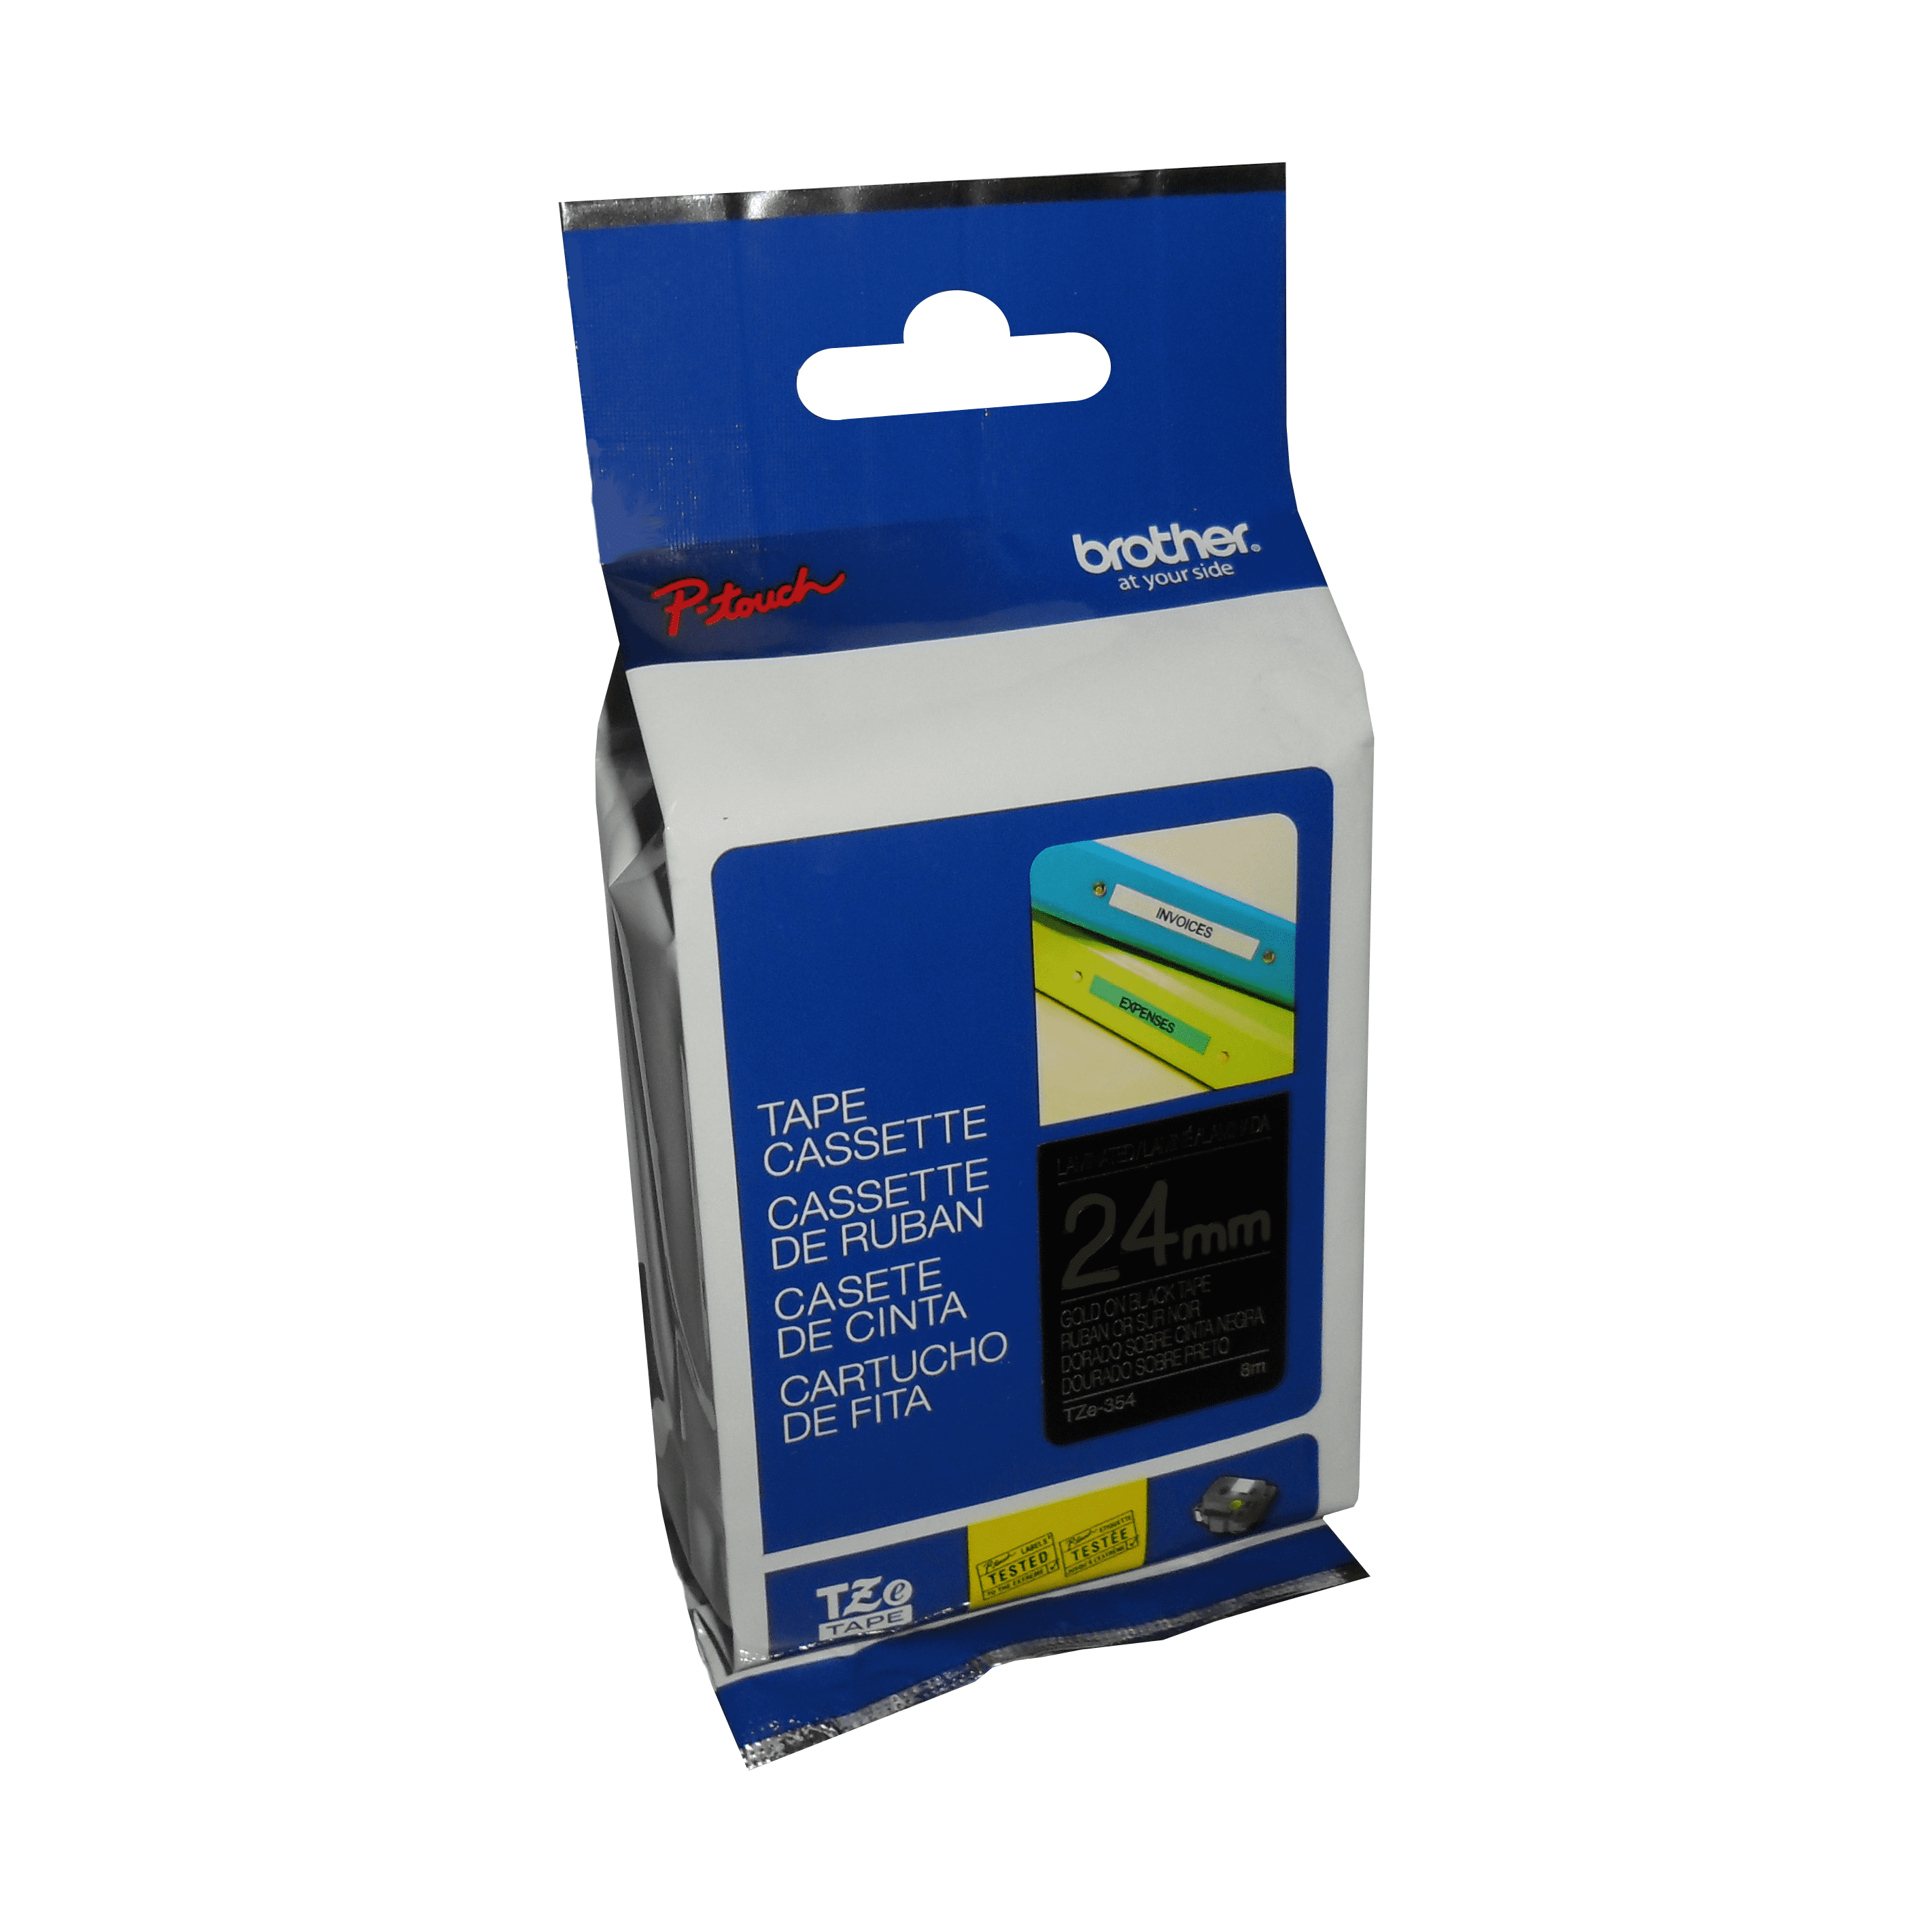 Brother Genuine TZe354 Gold on Black Laminated Tape for P-touch Label Makers, 24 mm wide x 8 m long